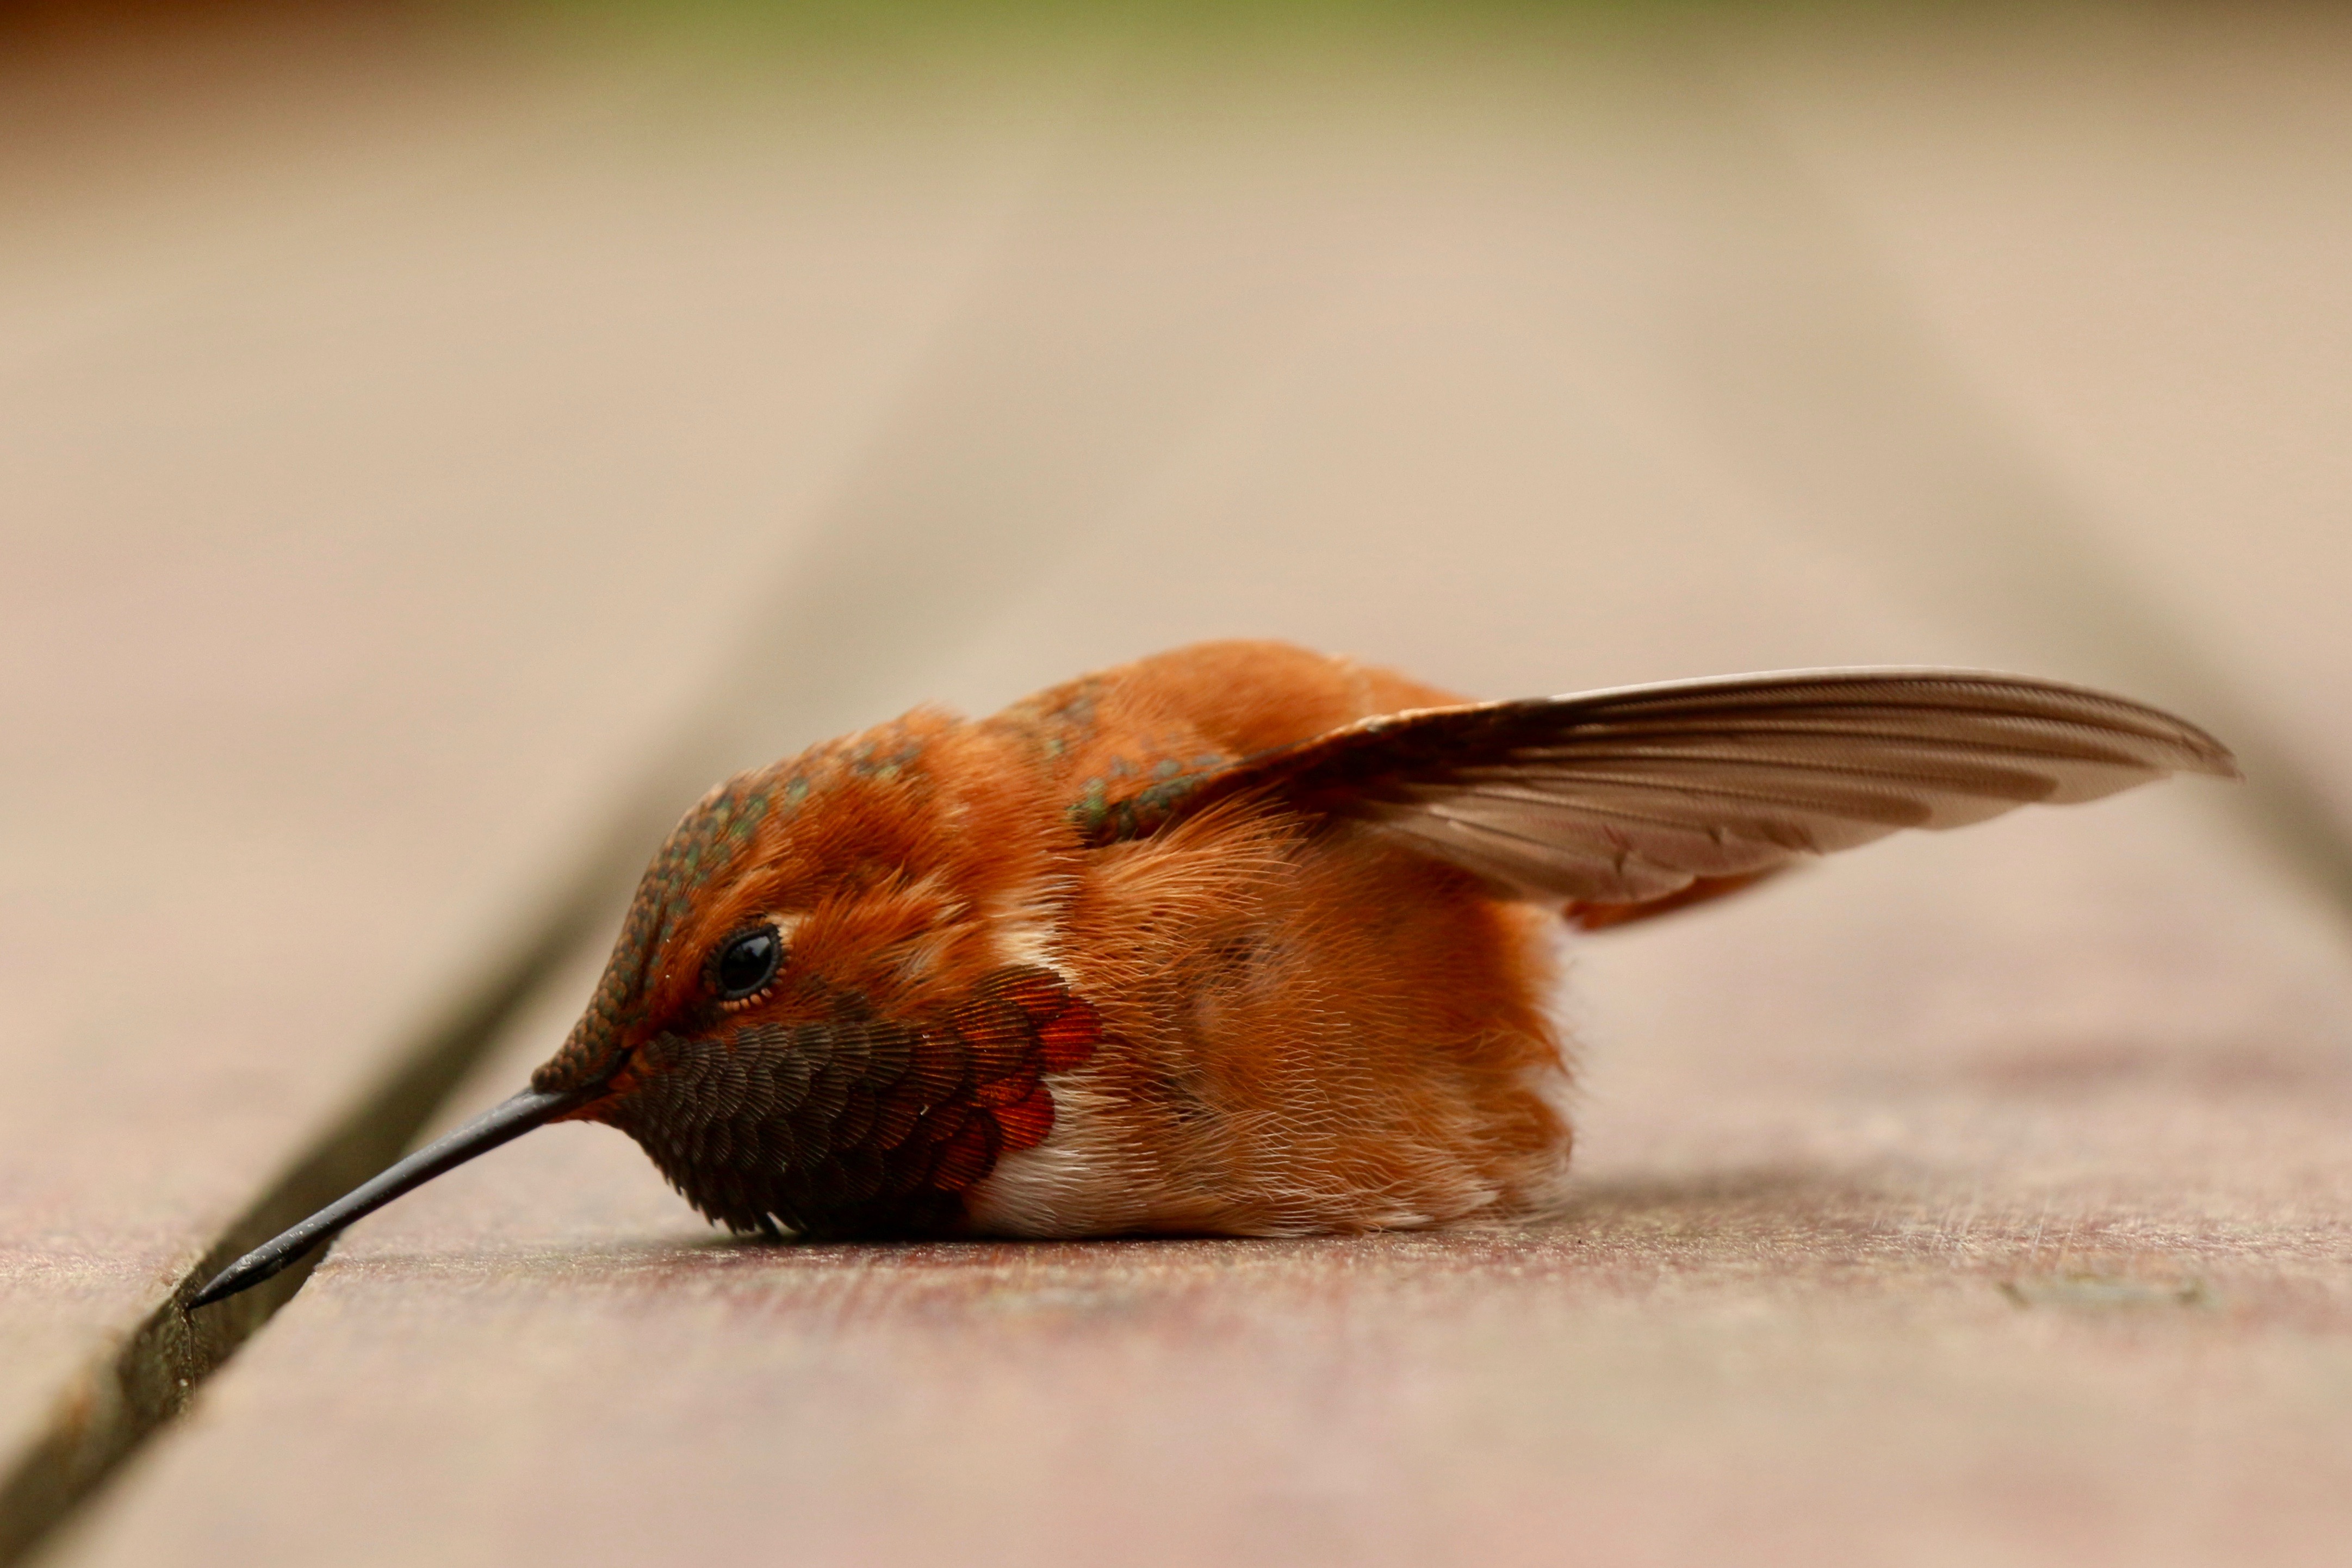 A rufous hummingbird lying prone on a wooden deck. It flew into a bird-proofed window and fell onto the deck and was stunned for a few hours but eventually managed to fly away. Its called a rufous hummingbird because its feathers are rufous, i.e., reddish-brown. This closeup shows its pointy black bill and the rufous feathers, and this bird is a male because of its bright red and iridescent "gorget," or throat feathers.
